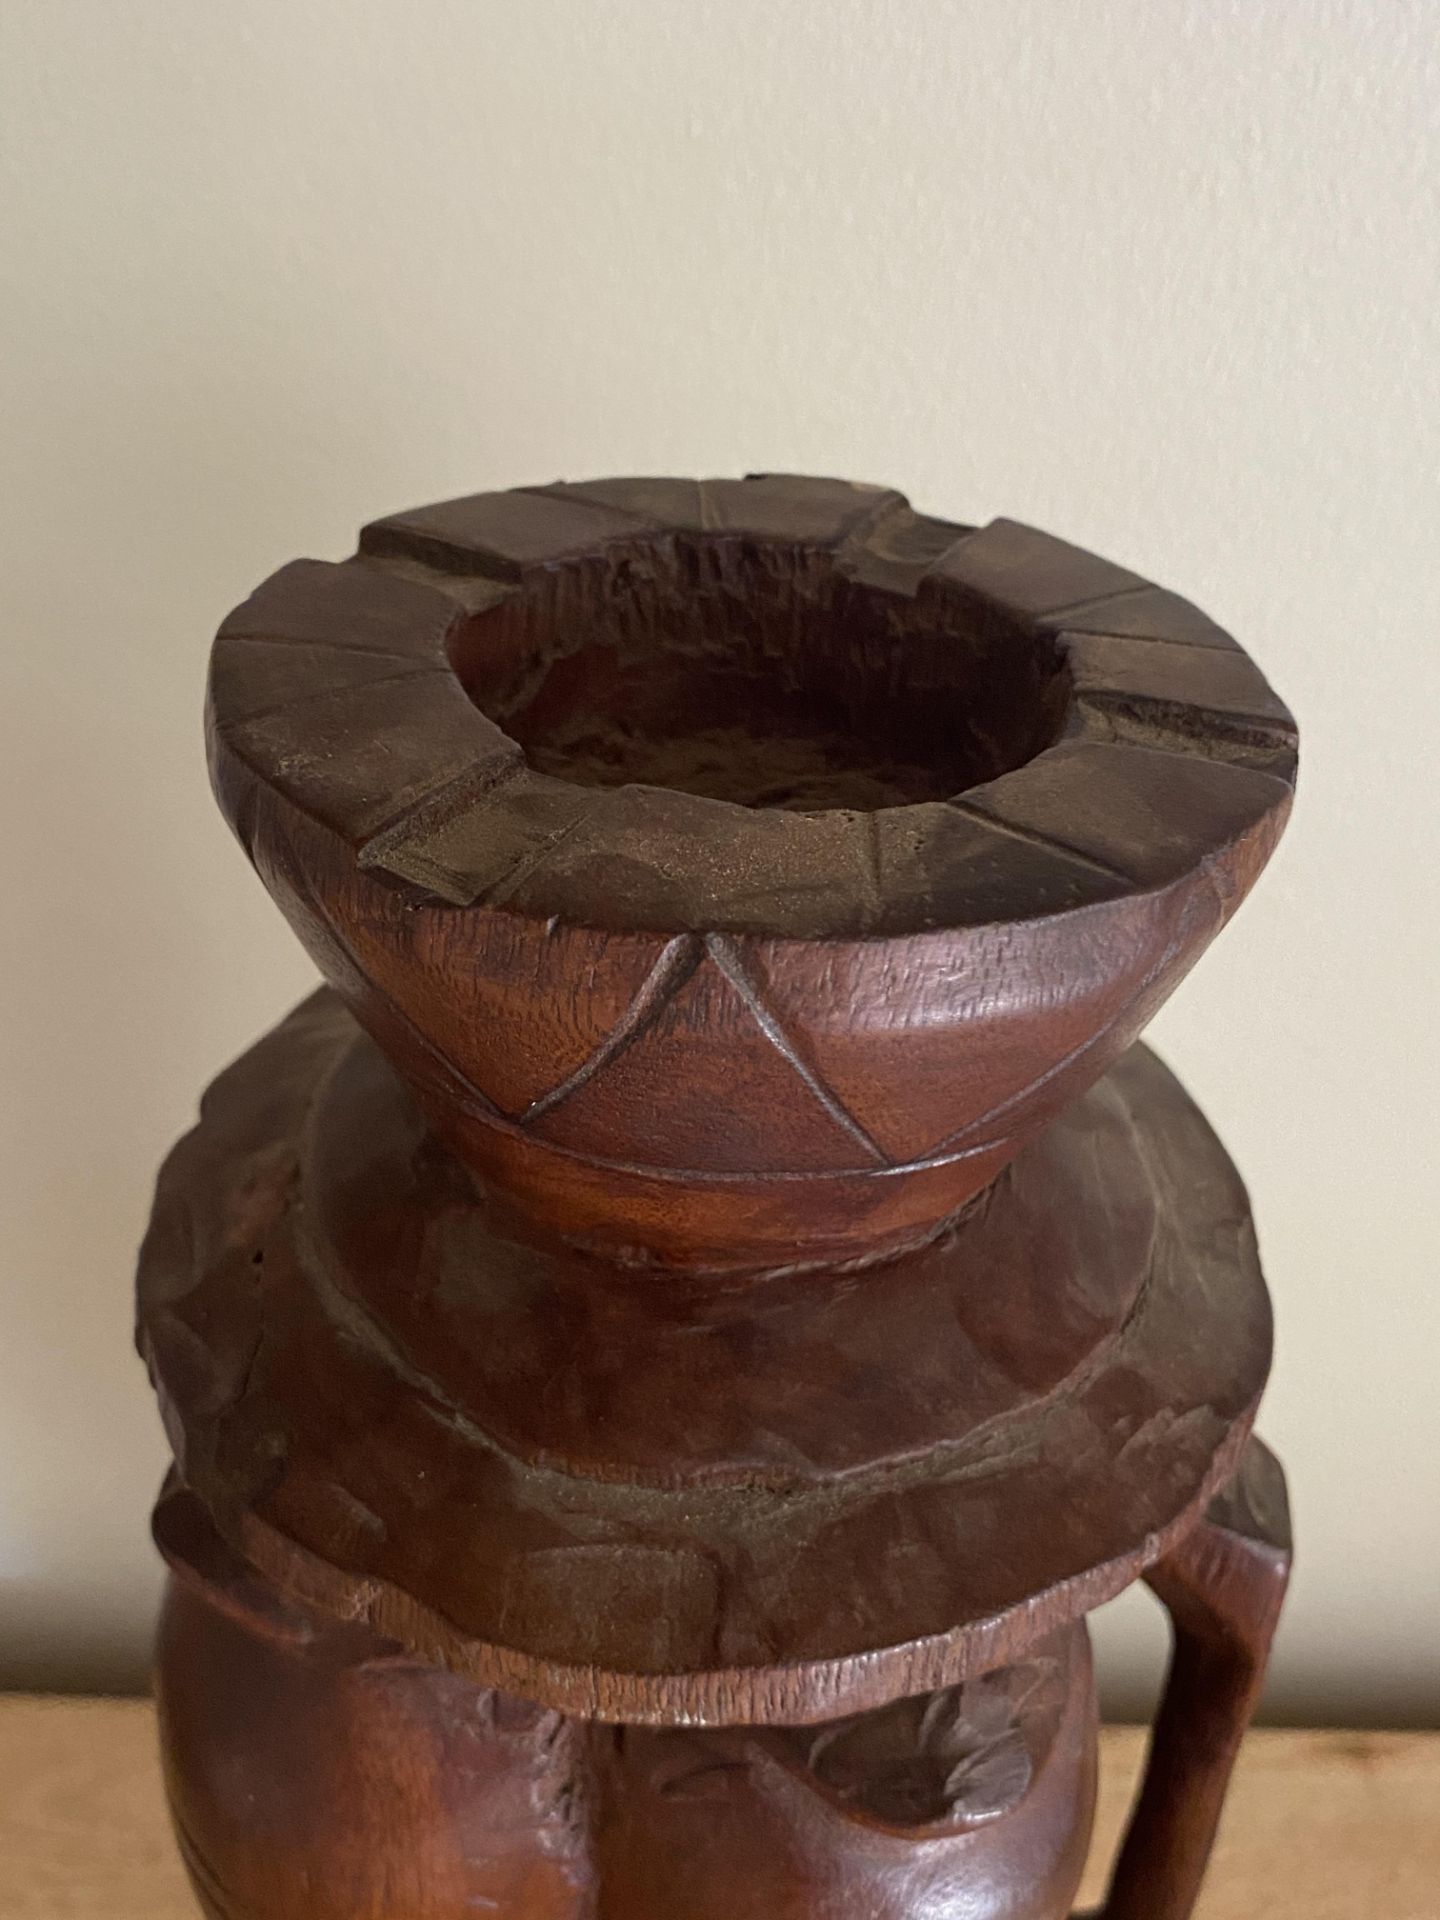 A VINTAGE MID 20TH CENTURY AFRICAN TRIBAL CARVED WOODEN FACE MASK JUG WITH HANDLE AND ASHTRAY DESIGN - Image 4 of 6